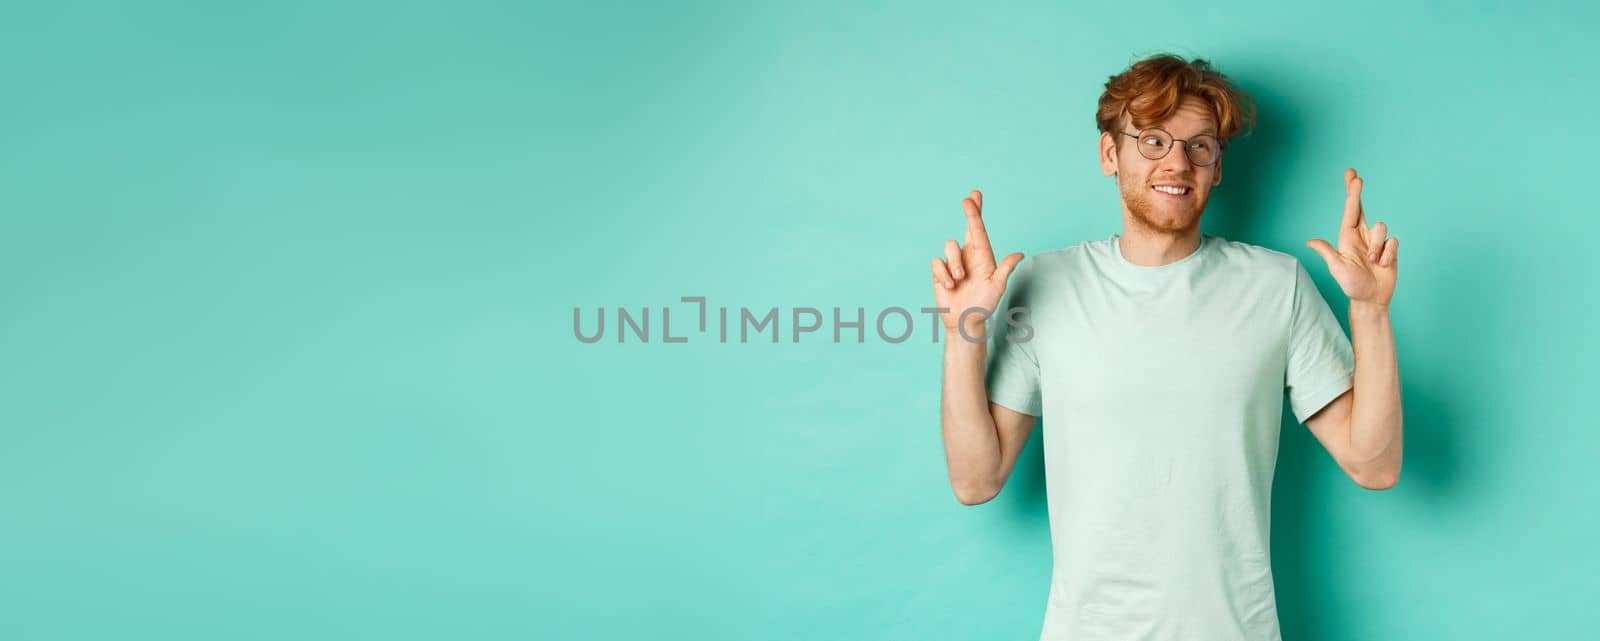 Hopeful redhead man in glasses making a wish, cross fingers and looking right at copy space, dreaming about something or making wish, standing over turquoise background.